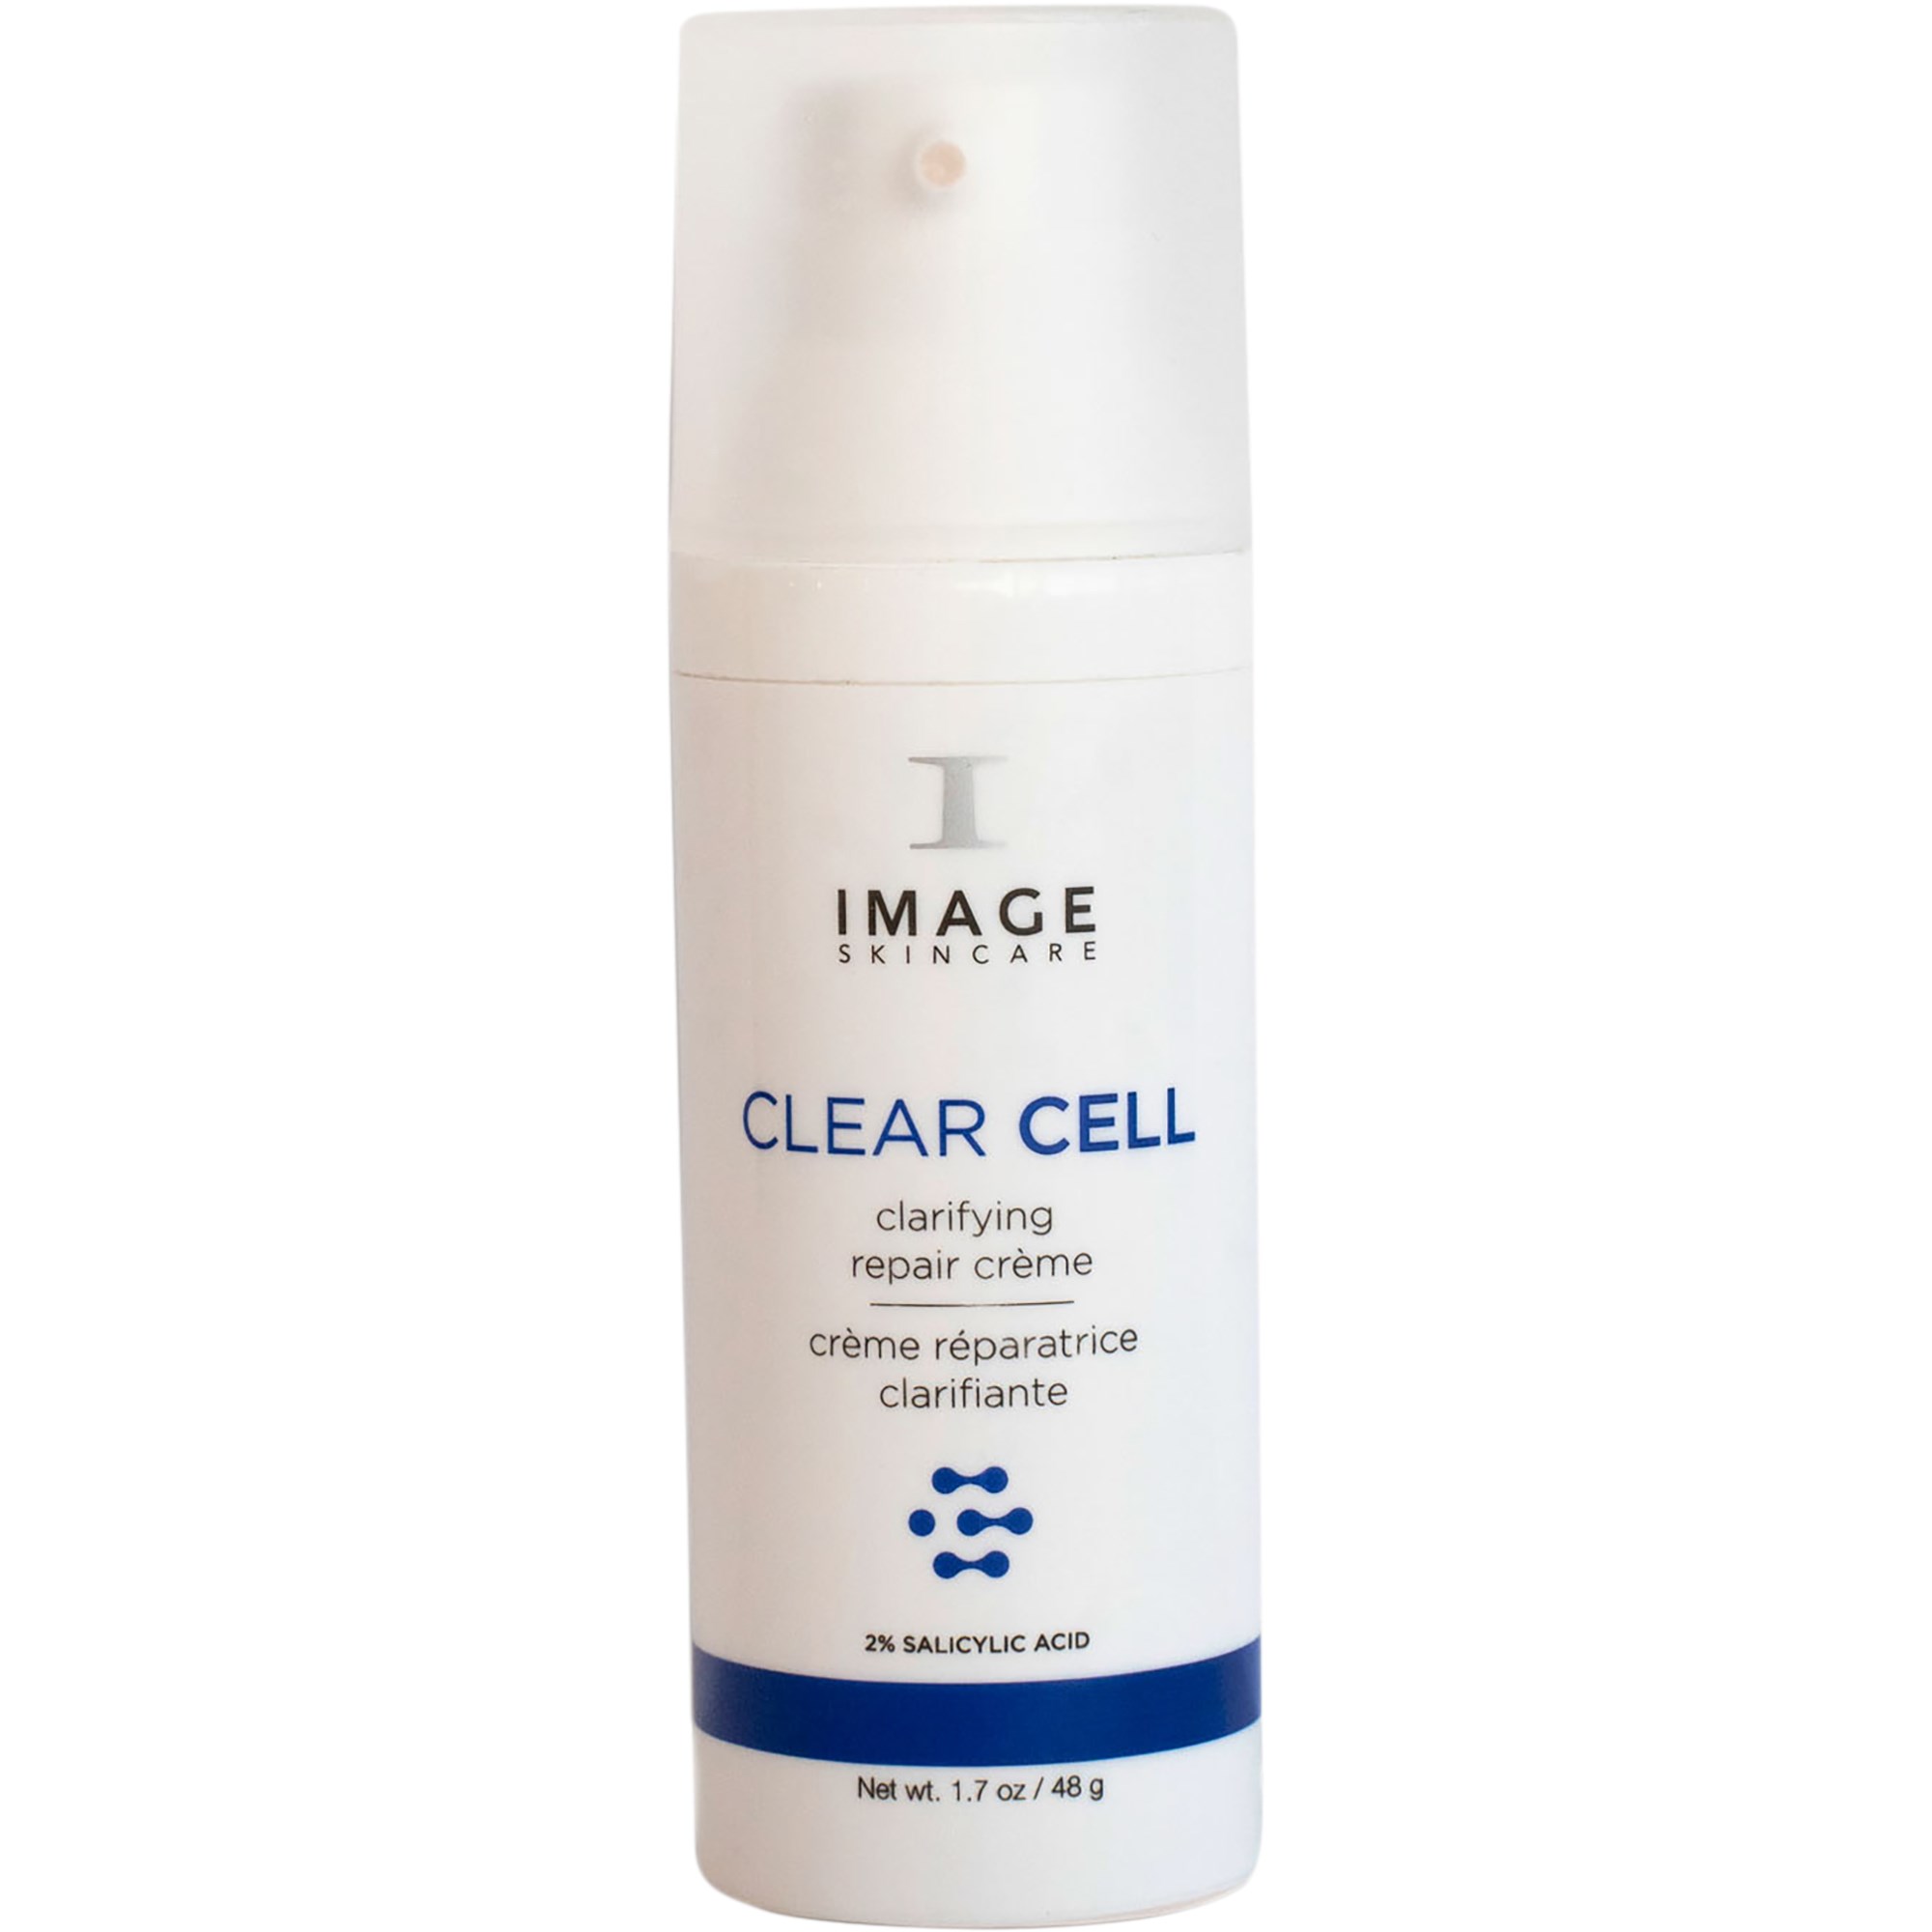 IMAGE Skincare Clear Cell Clarifying Repair Crème 48 g